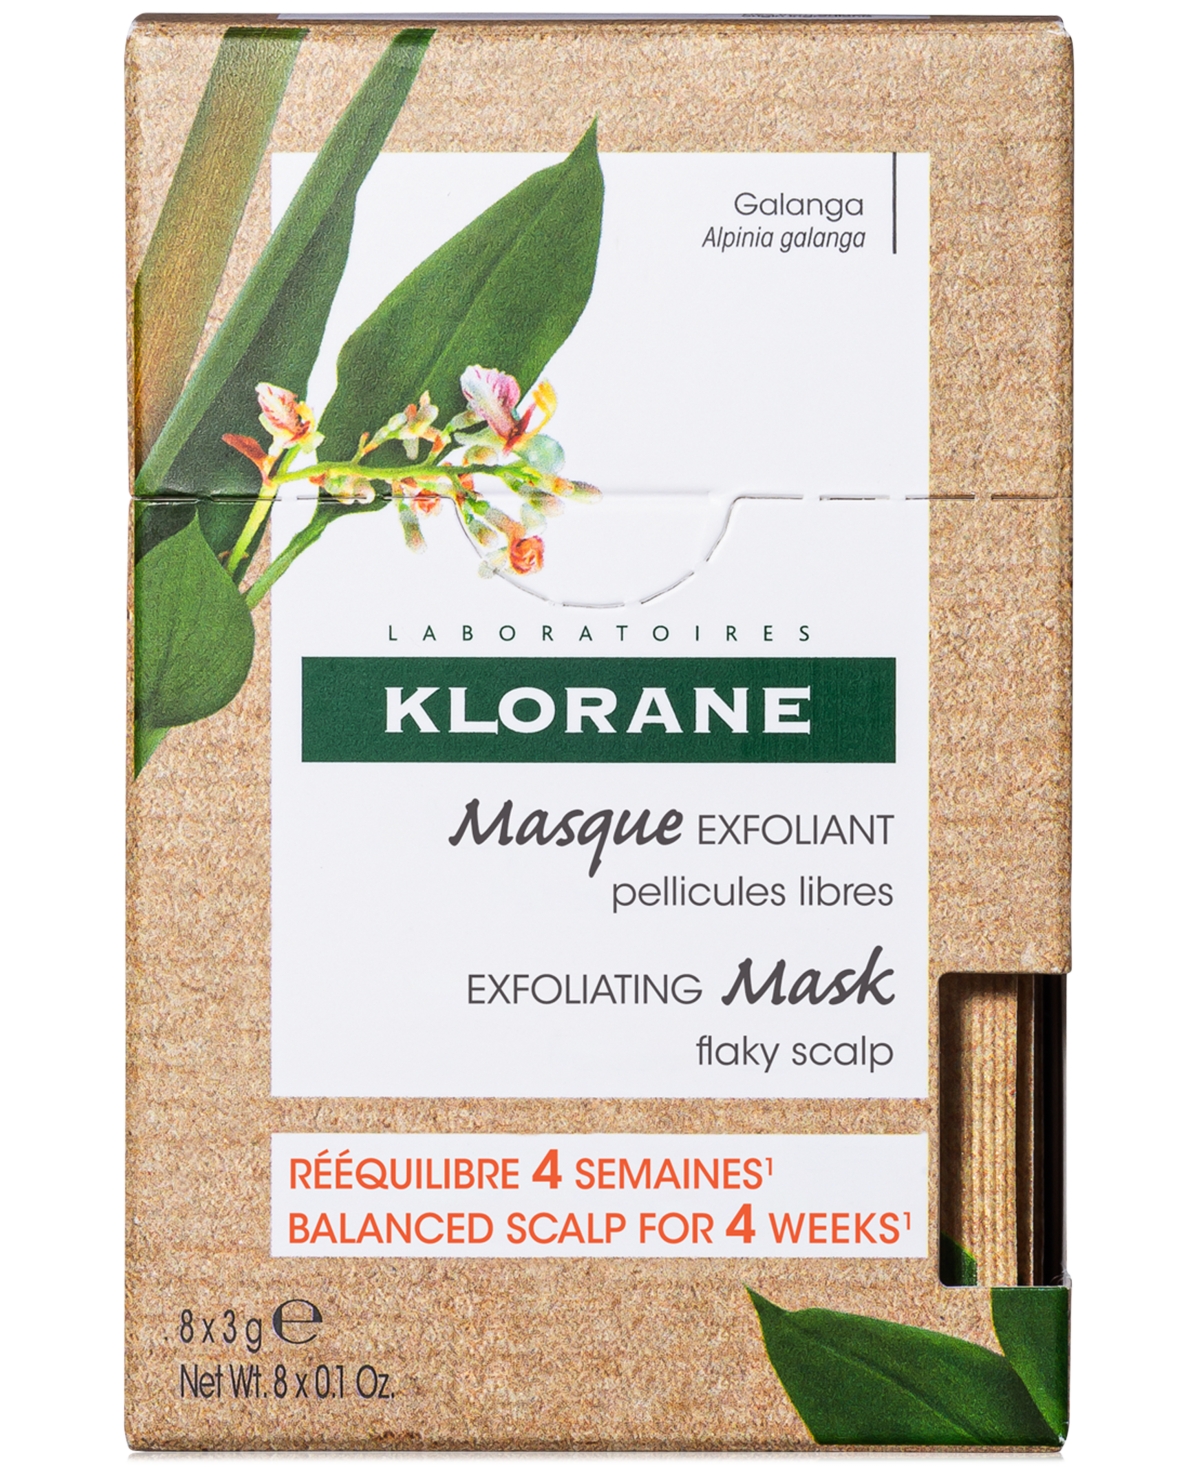 Klorane Exfoliating Mask With Galangal For Flaky Scalp, 8-Pk.